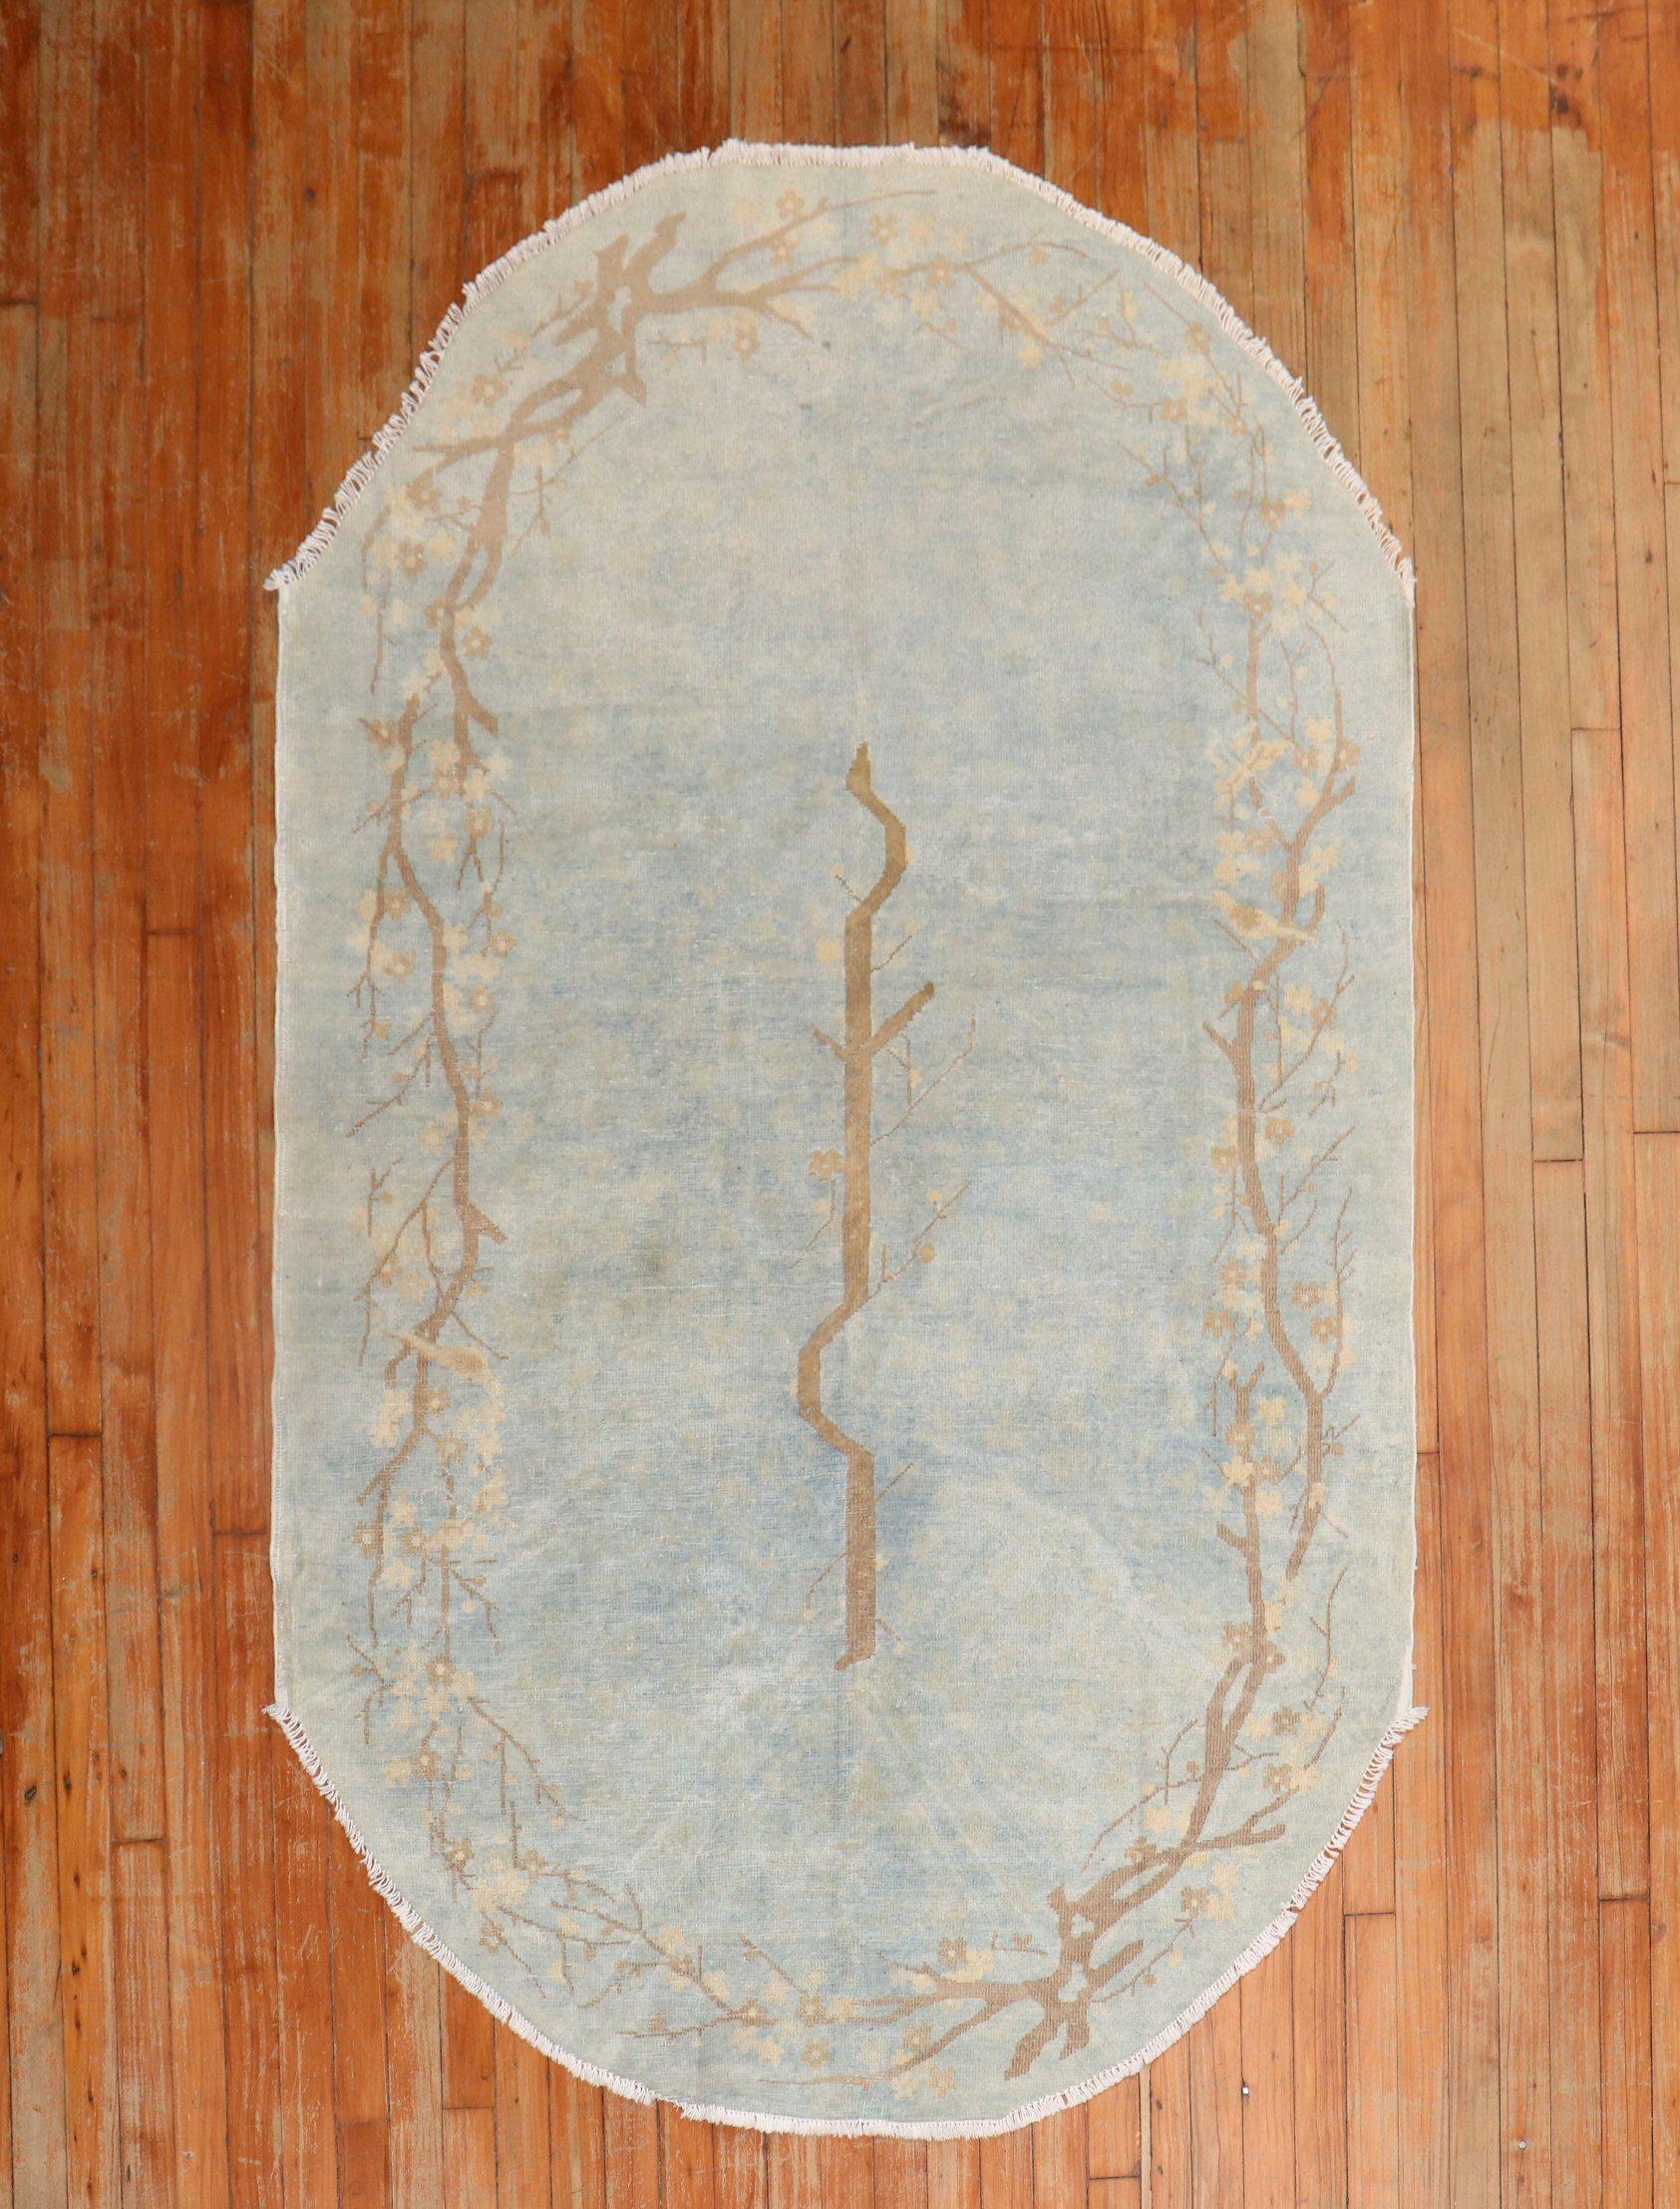 An oval-shaped worn early 20th century Chinese rug in powder blue.

Measures: 4' x 7'.

